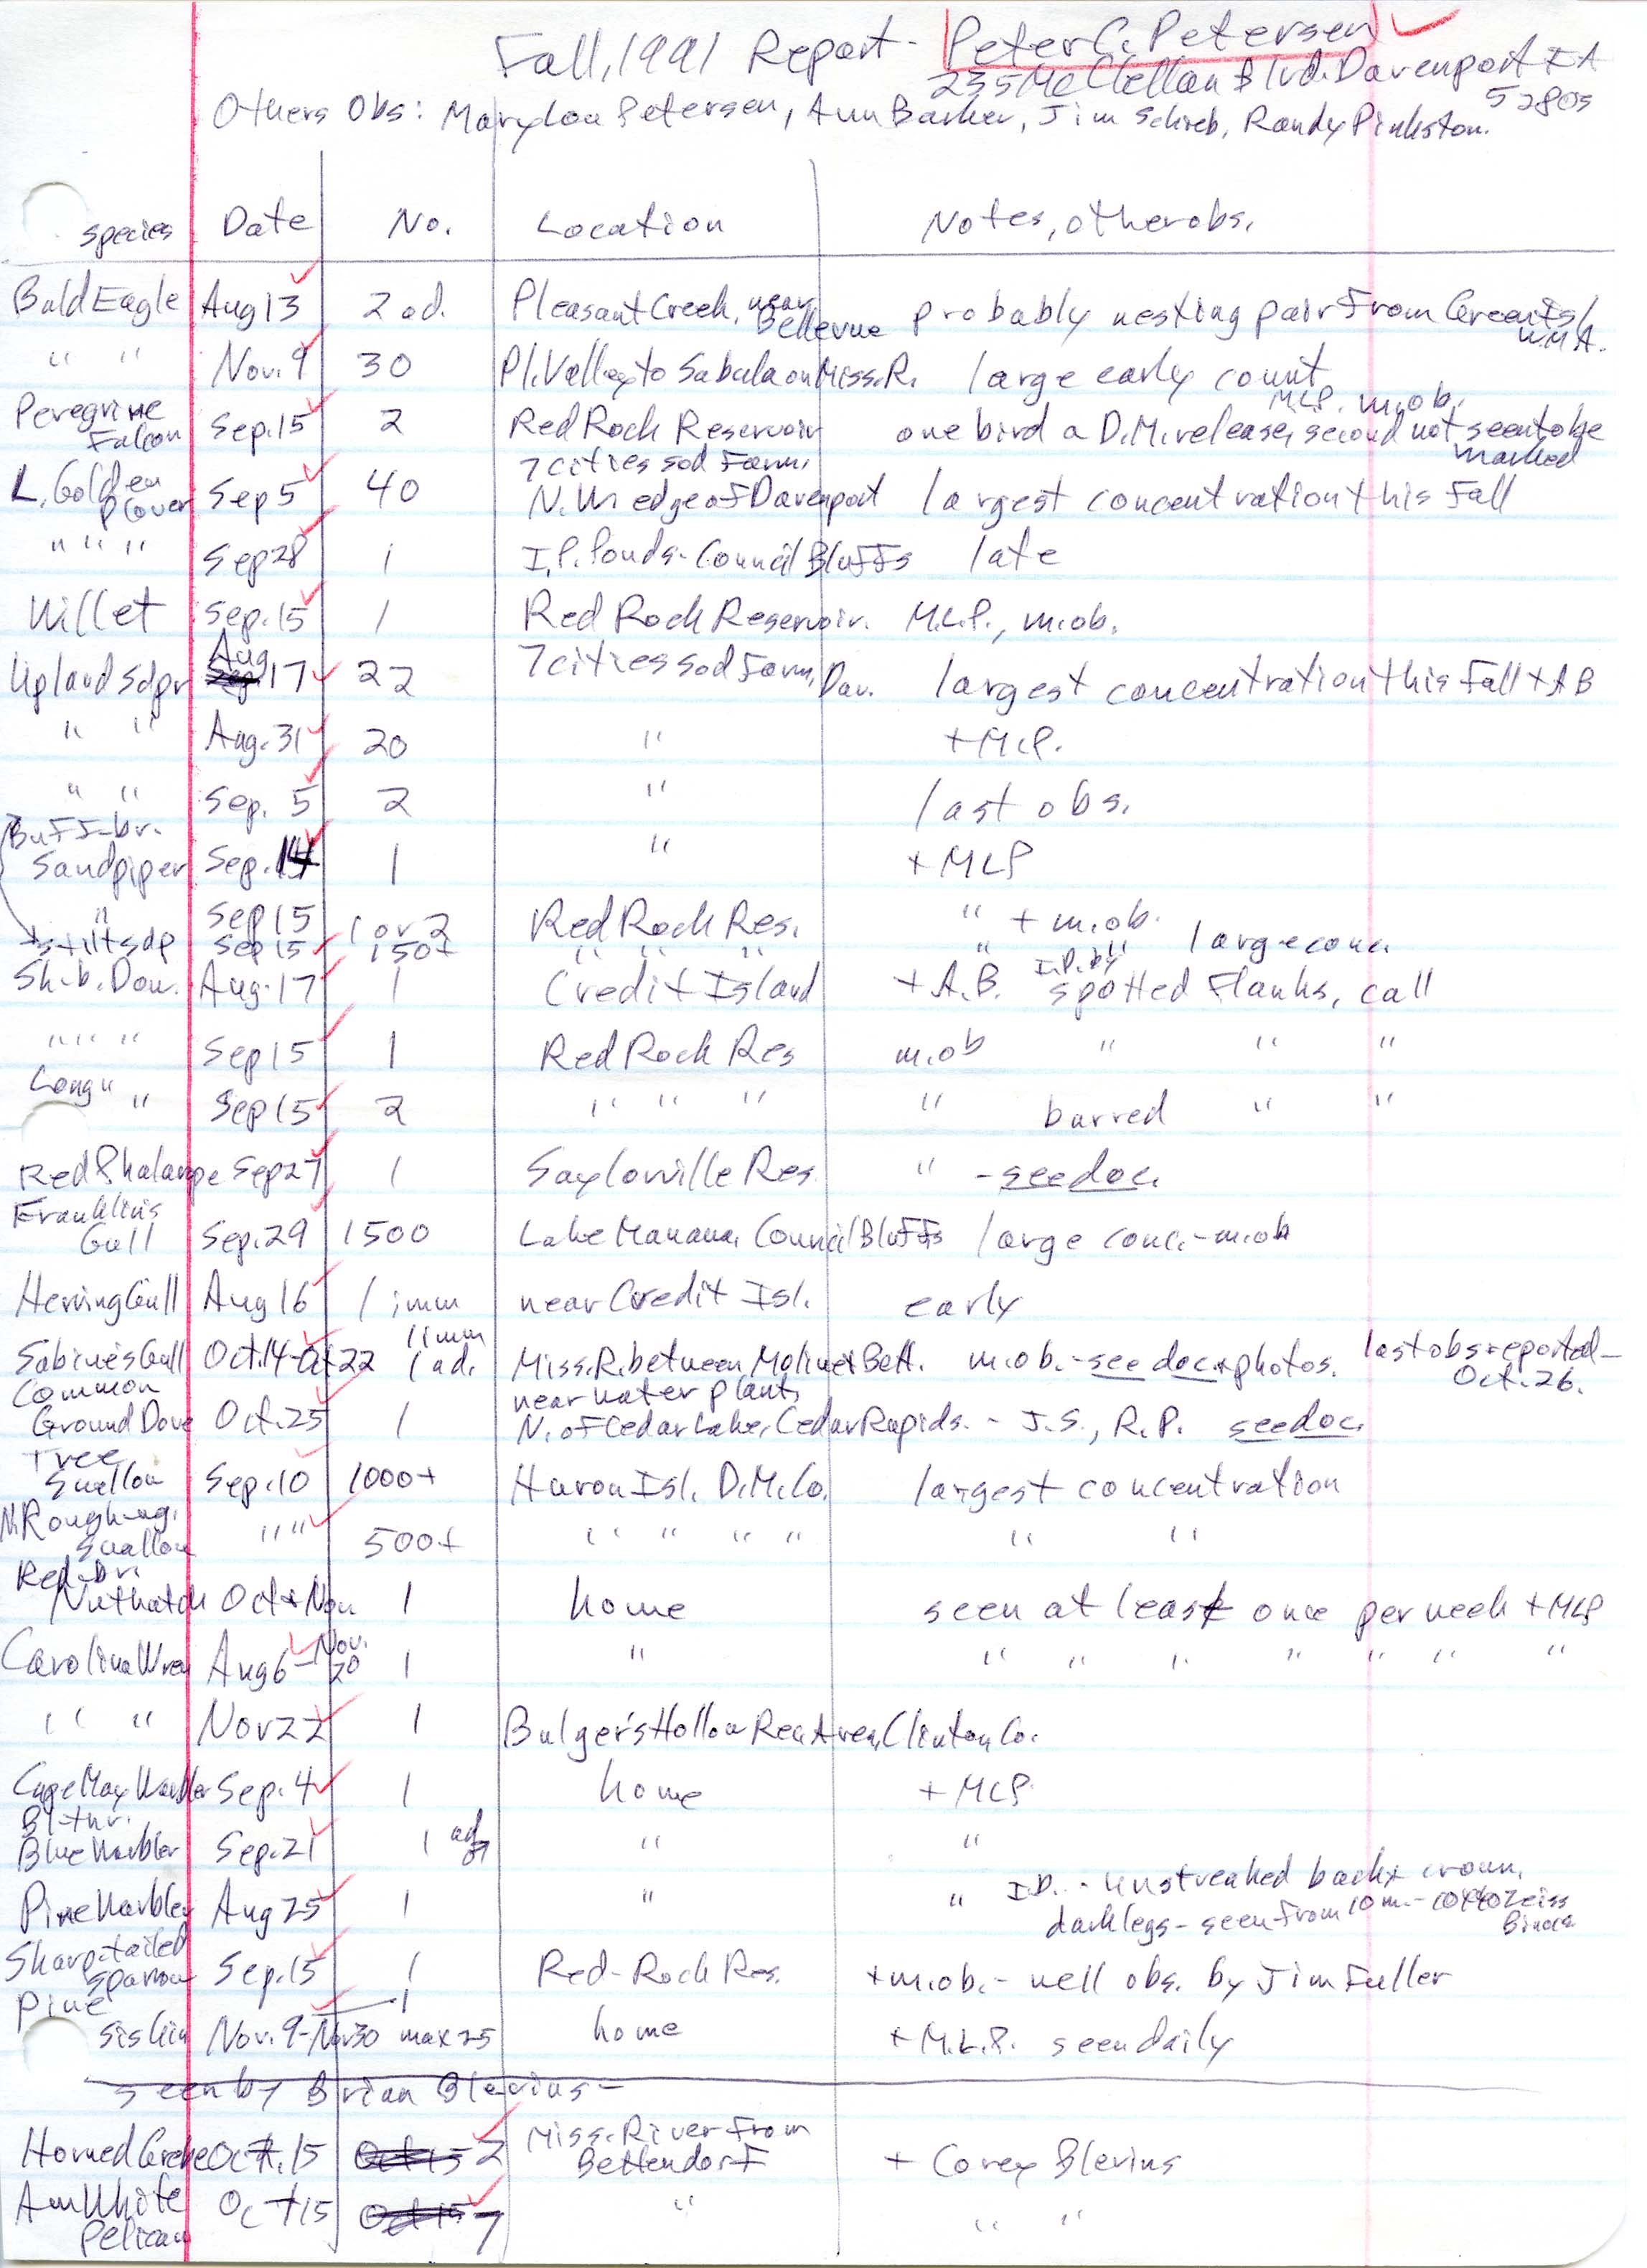 Field notes contributed by Peter C. Petersen, fall 1991